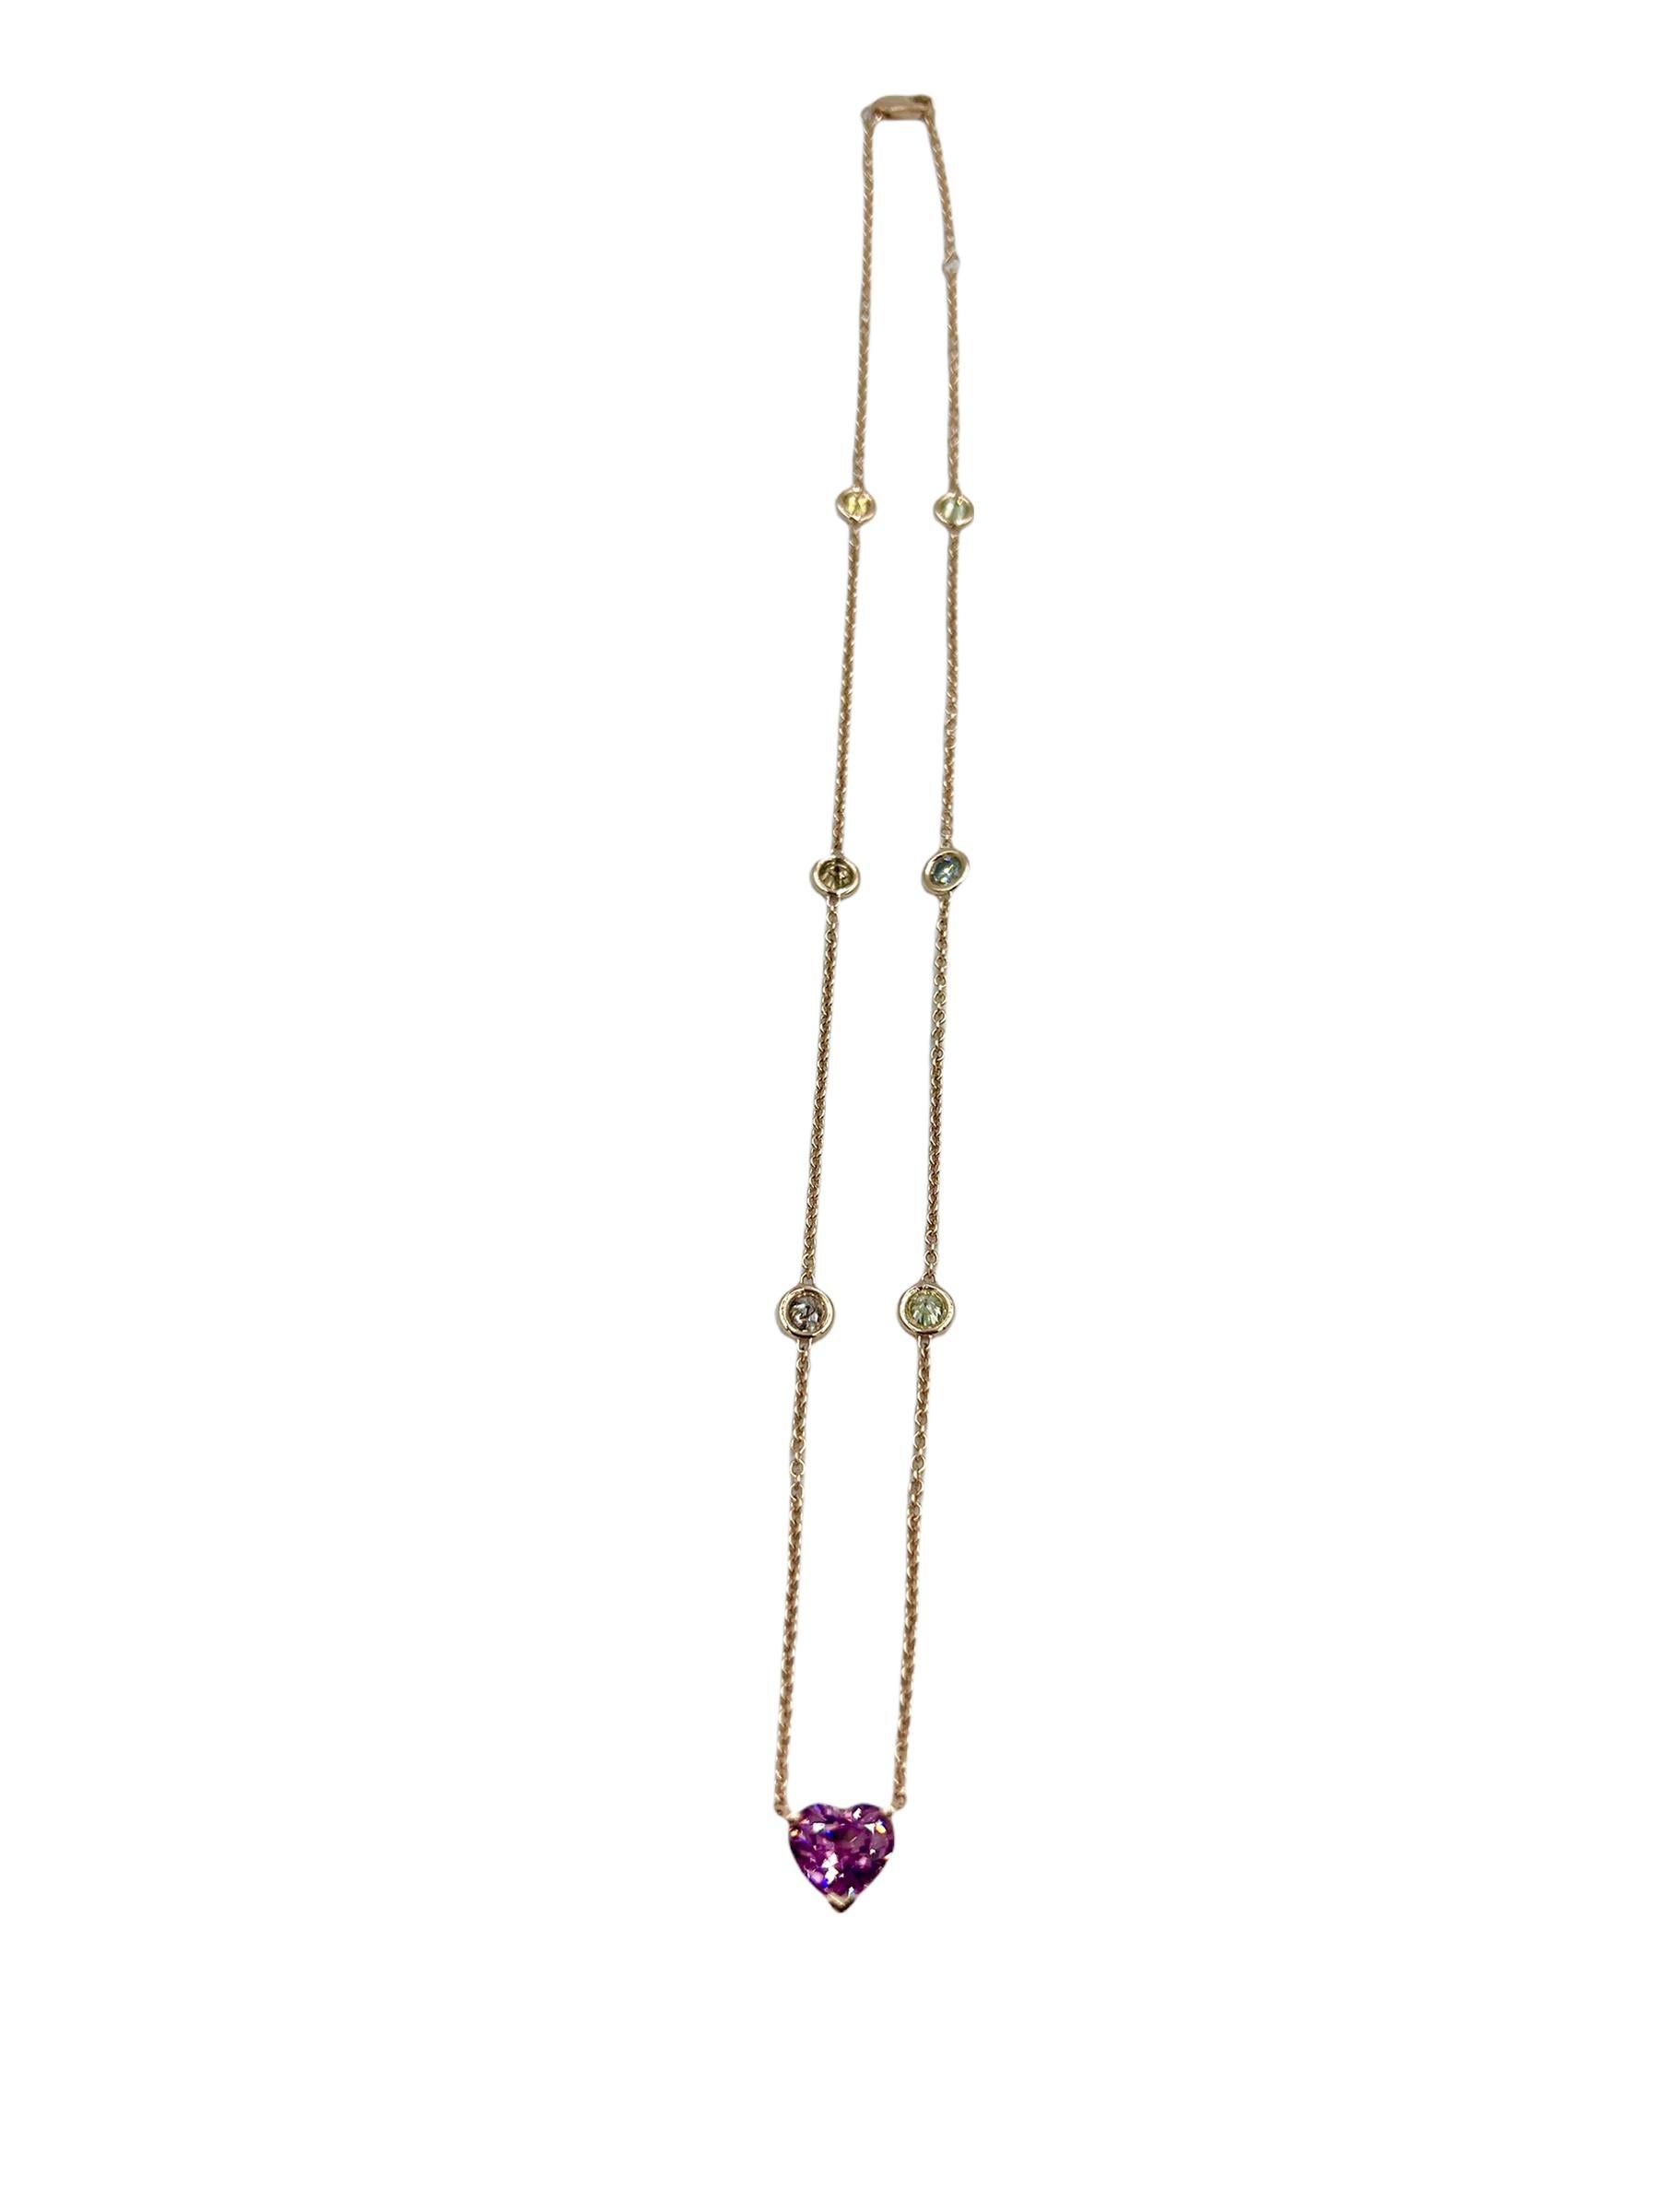 This handmade in the UK necklace had a beautiful pink coloured Spinel heart weighing at 1.96 carats on a double gallery collet. It is the centre of a 16